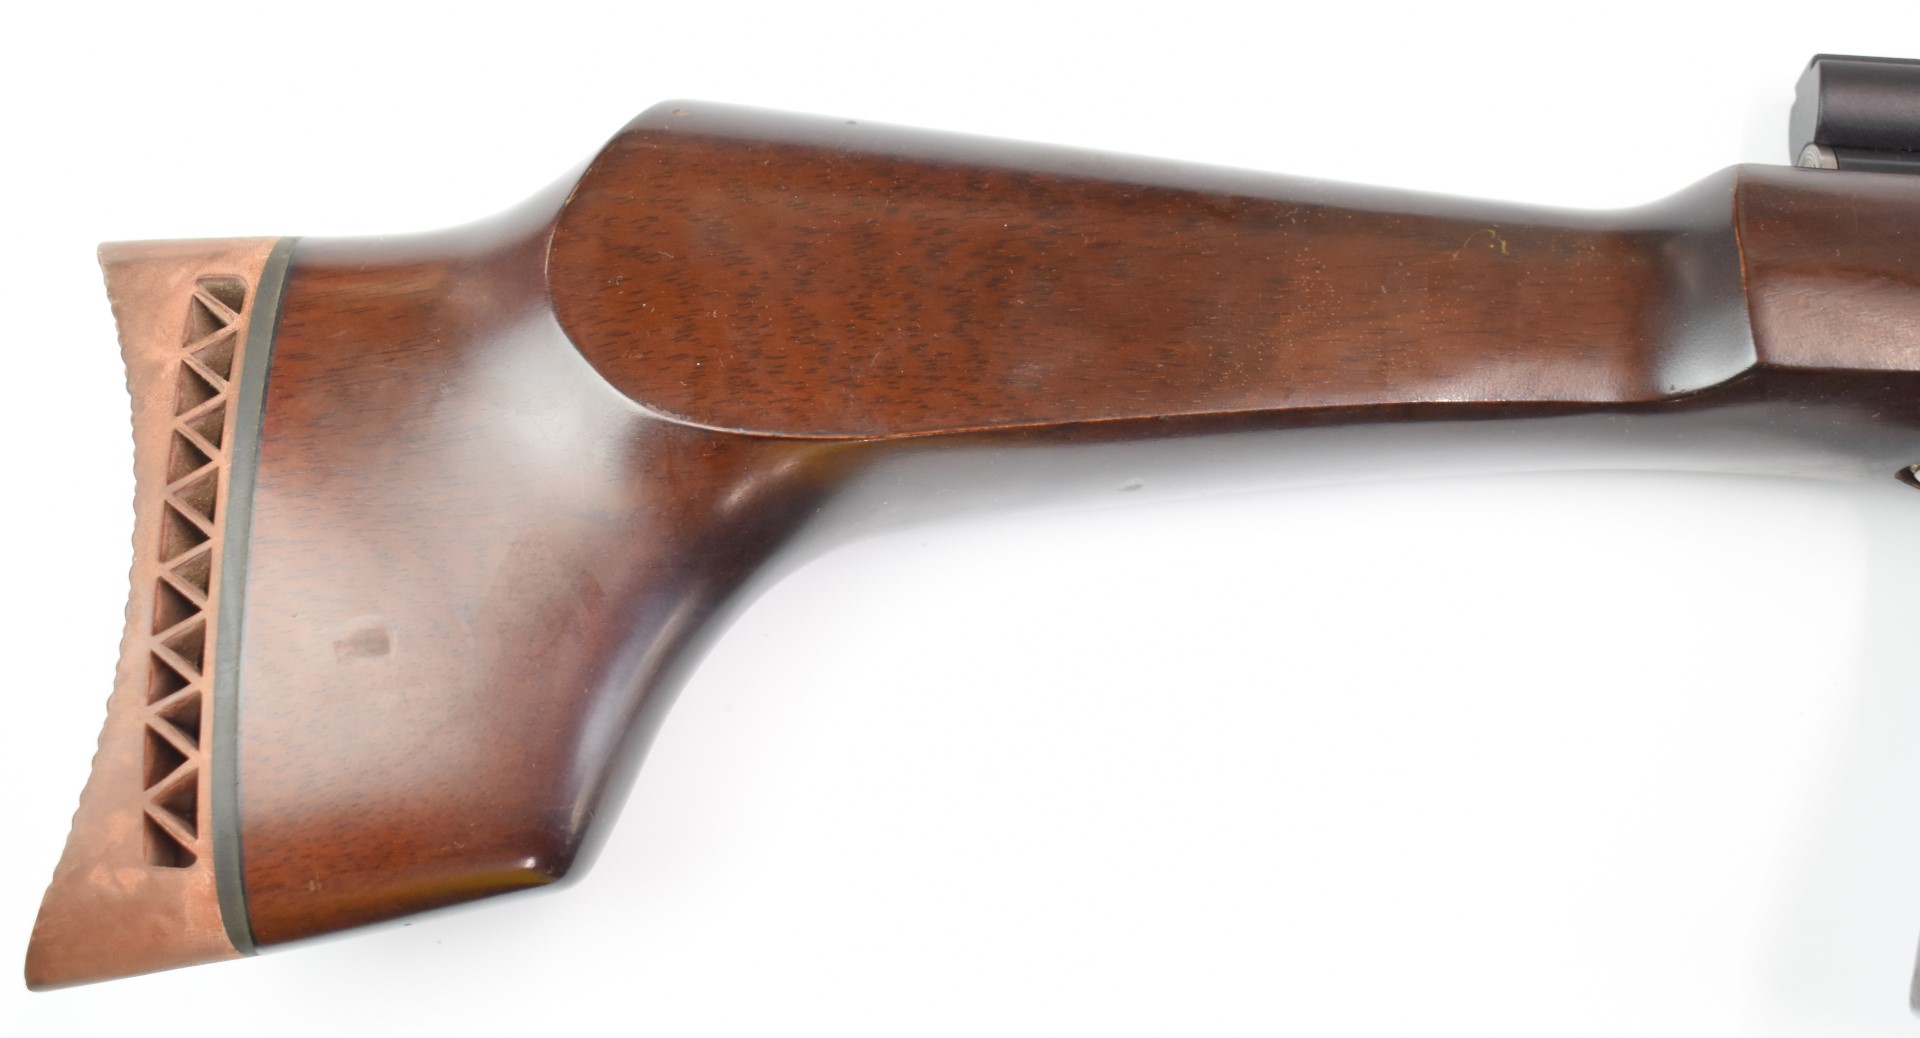 AGS-PCR1 .22 PCP bolt-action air rifle with pistol grip and adjustable trigger, serial number 00911. - Image 3 of 9